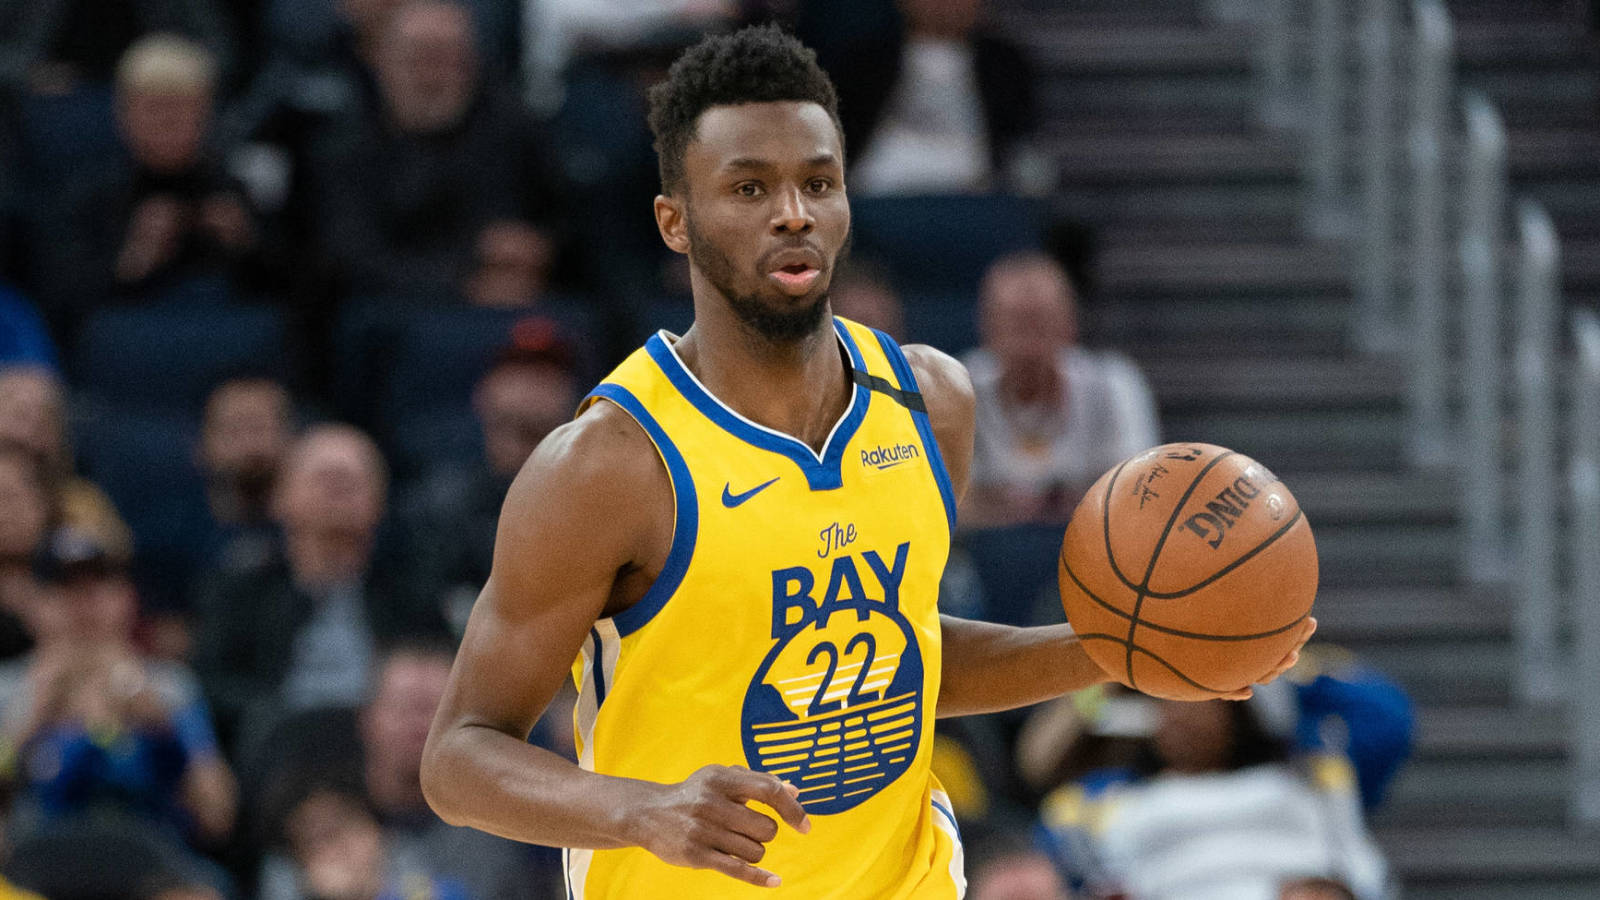 March 1, 2020; San Francisco, California, USA; Golden State Warriors guard Andrew Wiggins (22) dribbles the basketball during the fourth quarter against the Washington Wizards at Chase Center. Mandatory Credit: Kyle Terada-USA TODAY Sports